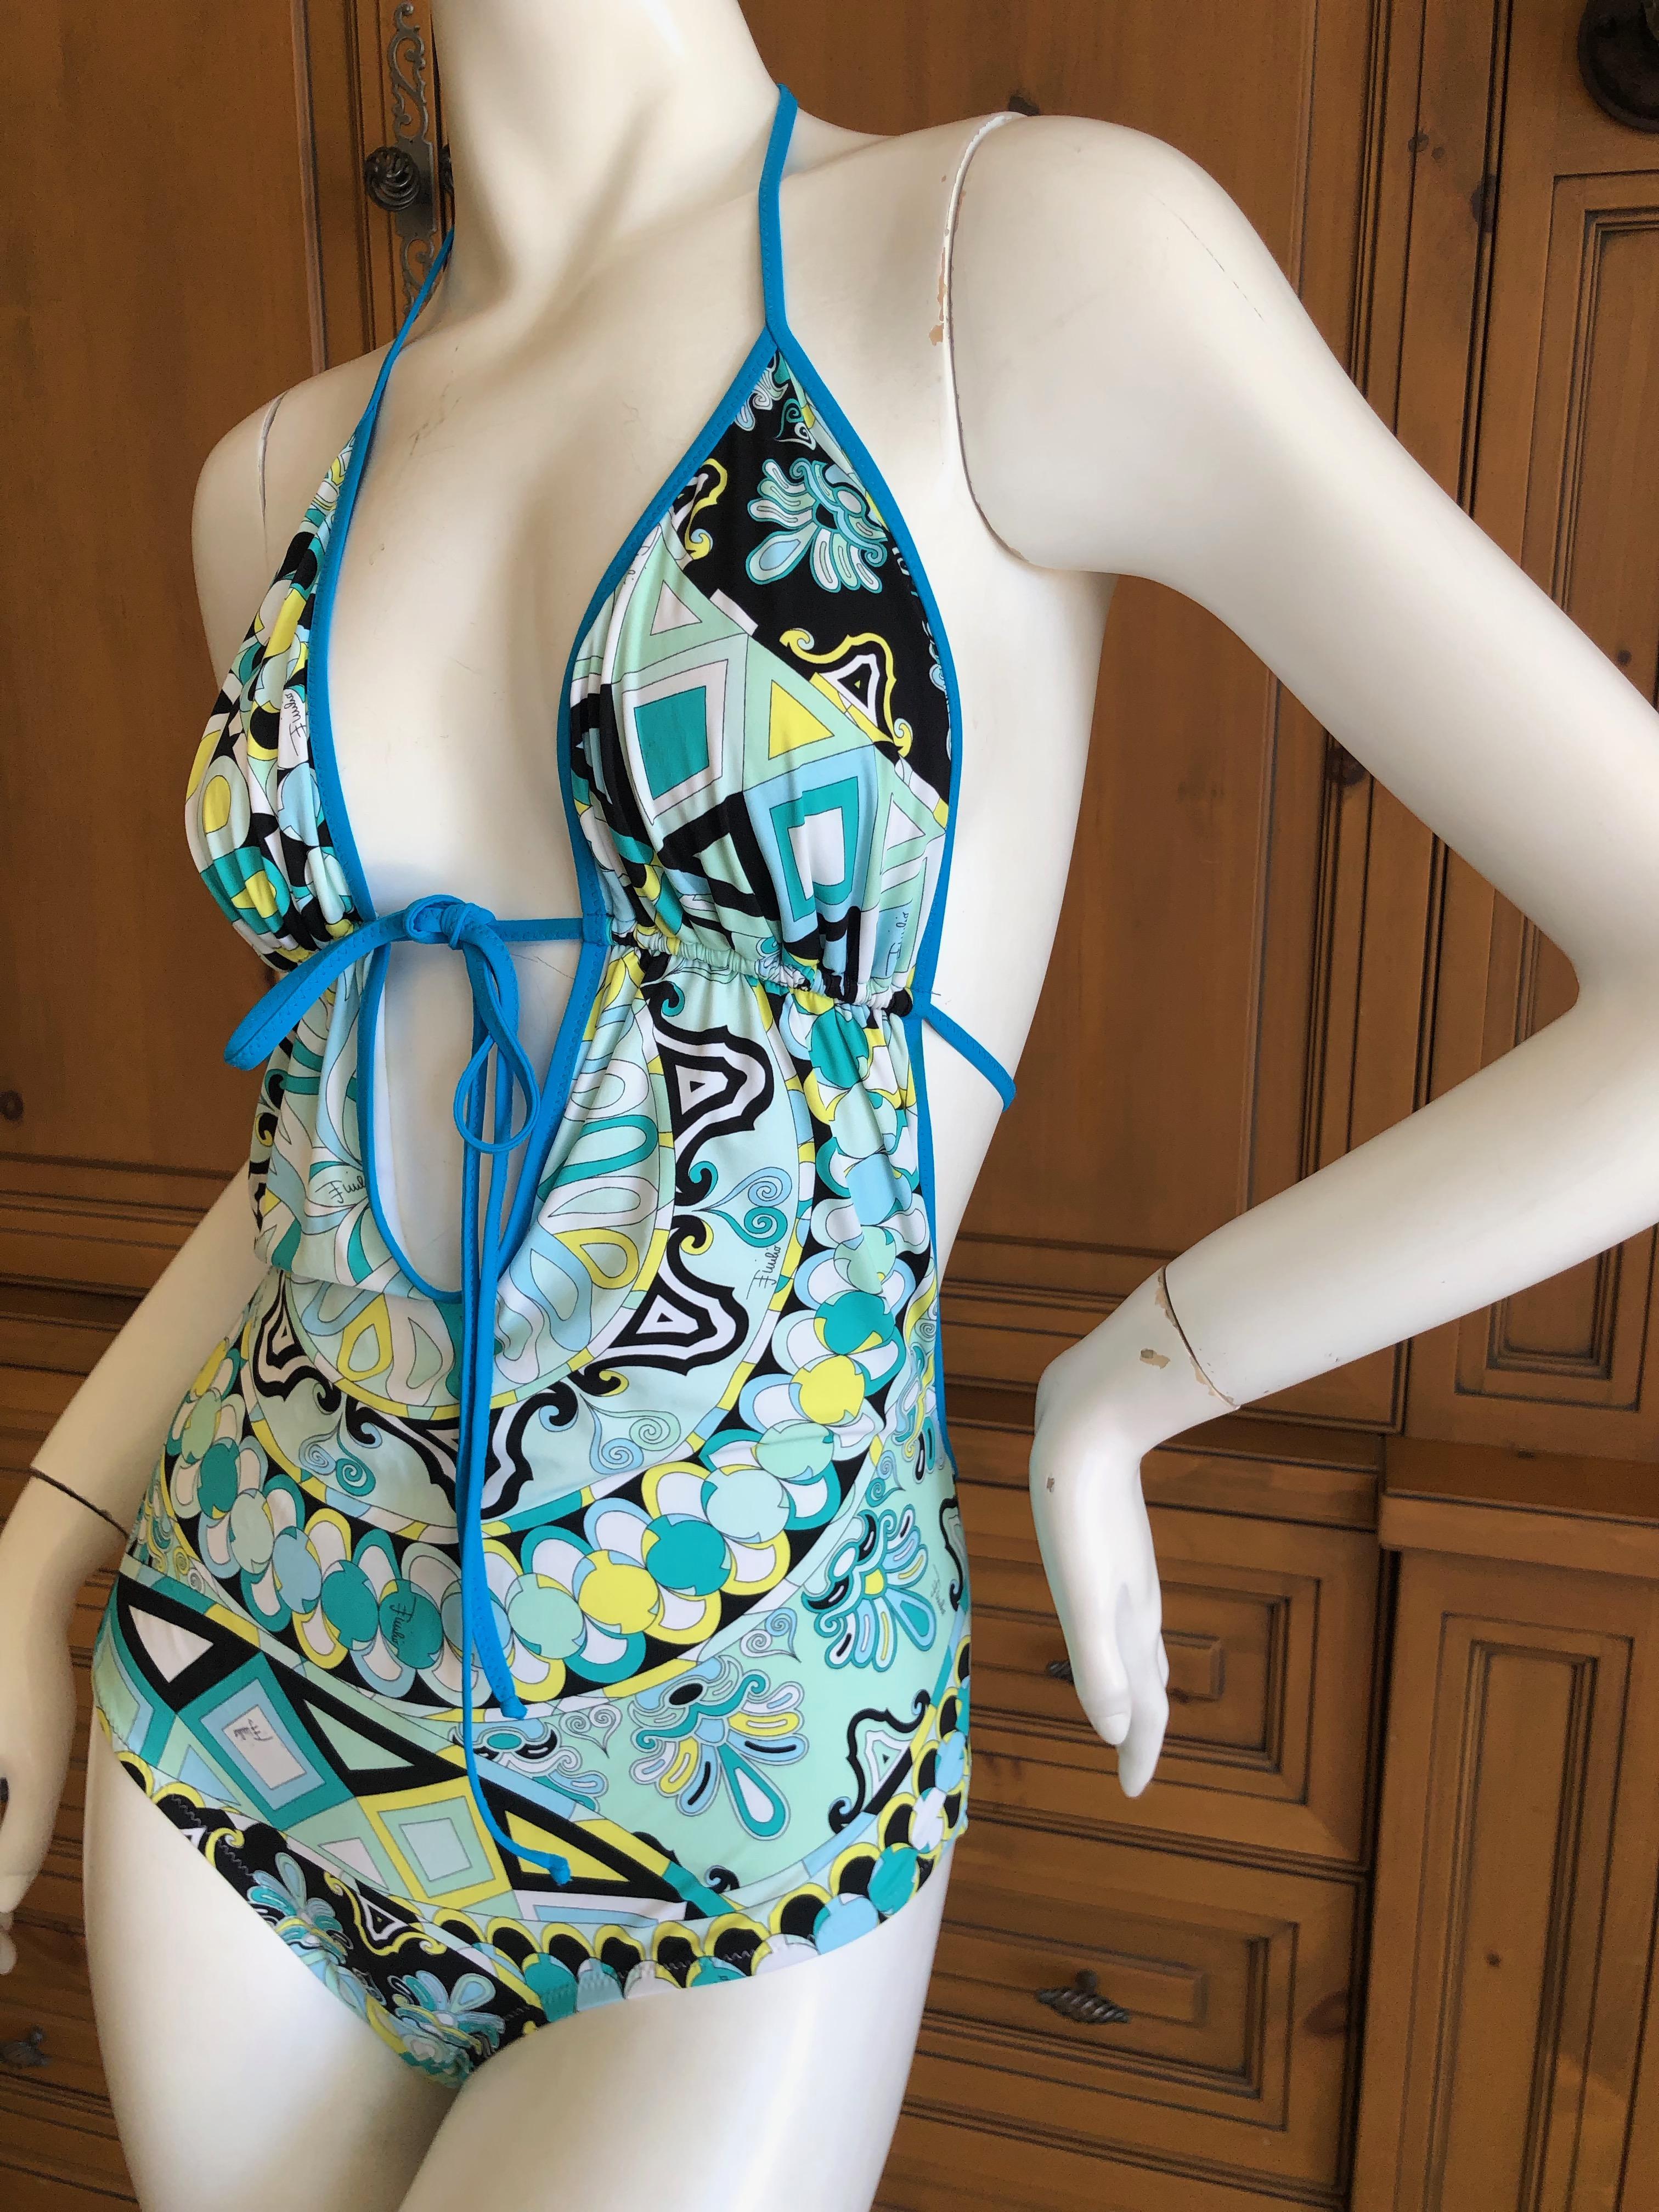 Emilio Pucci One Piece Swimsuit New with Tags Hard to Find Size 46

Bust 38